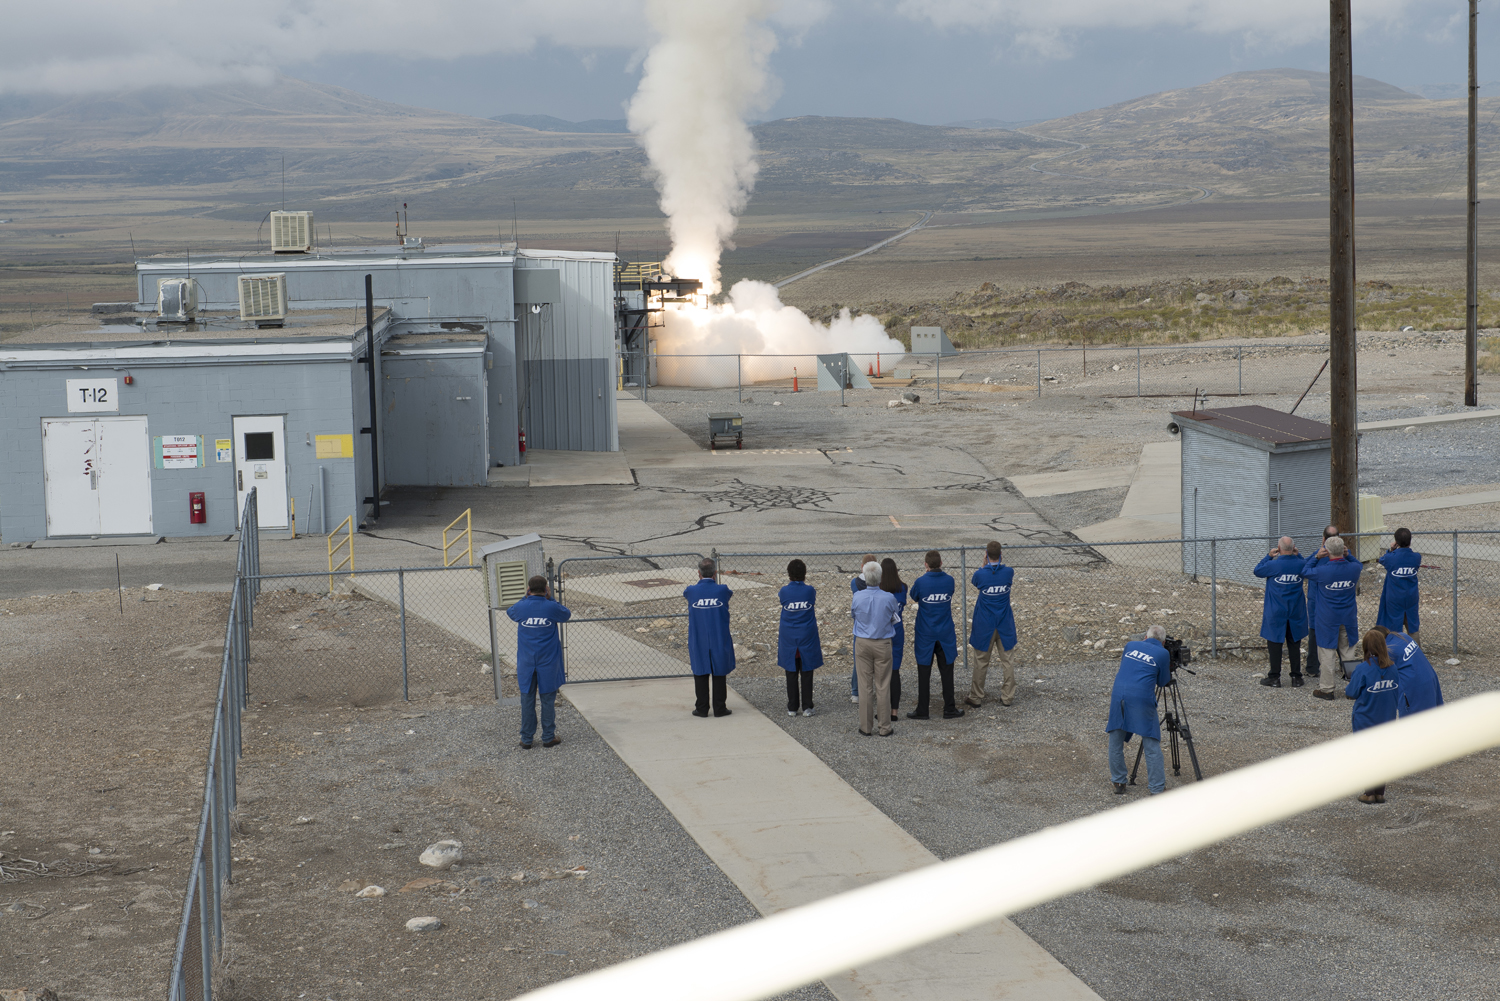 NASA and ATK successfully completed a static test of the launch abort motor igniter for the Orion crew capsule’s Launch Abort System (LAS) on Sept. 30, 2014. Photo Credit: ATK